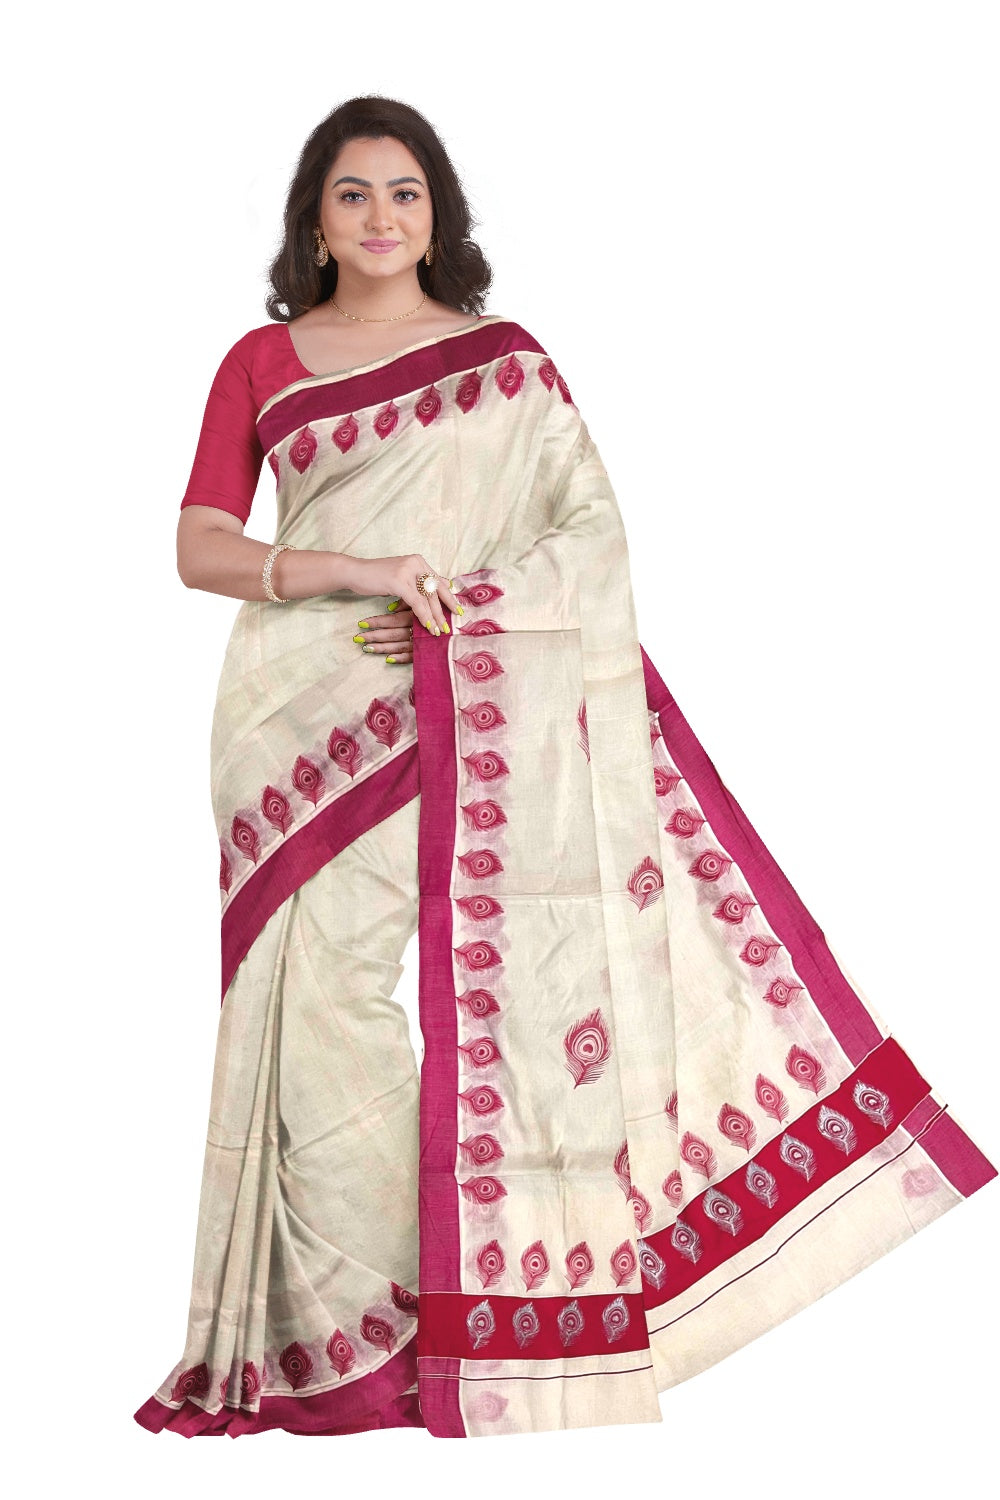 Off White Pure Cotton Kerala Saree with Peacock Feather Block Prints on Dark Pink Border and Tassels on Pallu